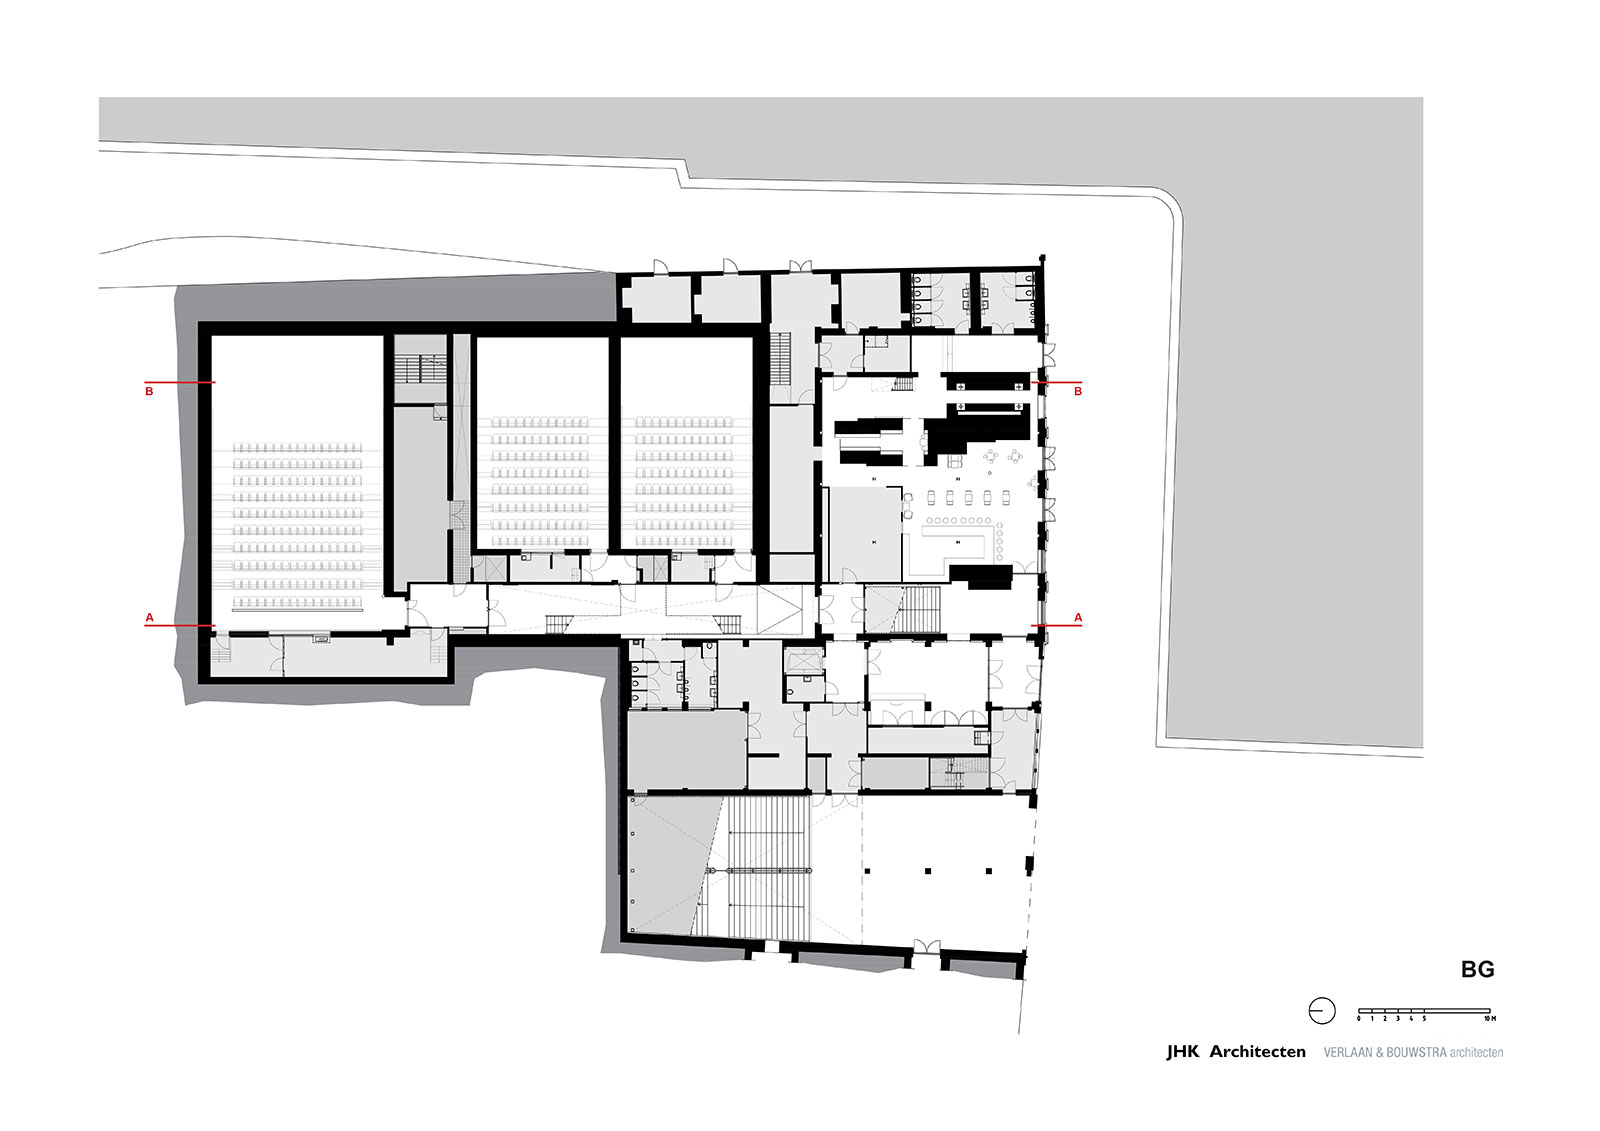 JHKVB Lumiere Cinema Maastricht floorplans and sections 3